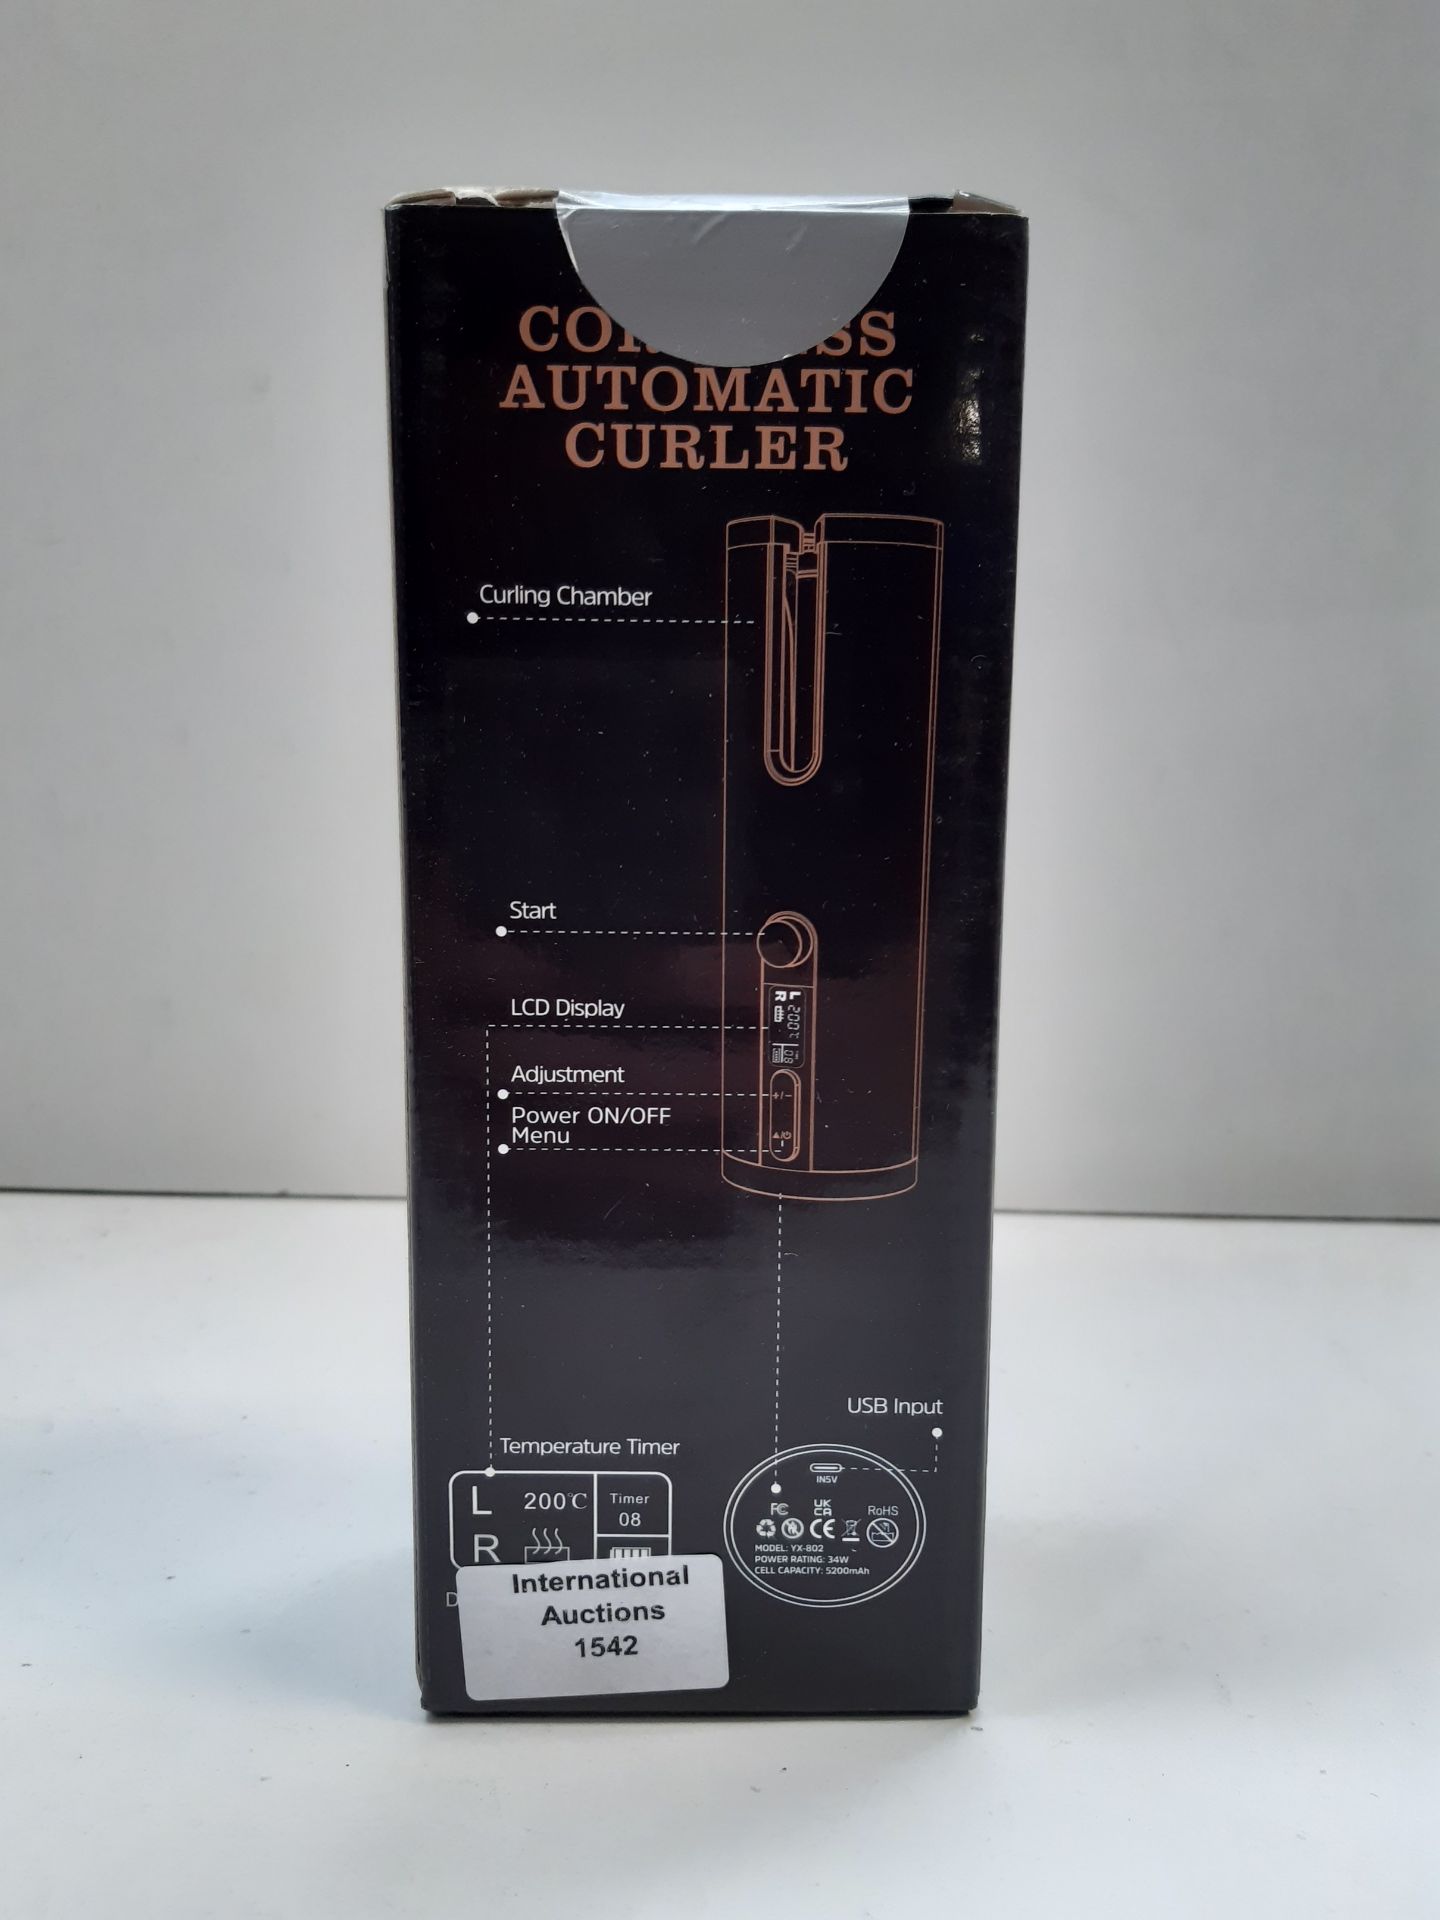 RRP £39.98 Cordless Hair Curler - Image 2 of 2